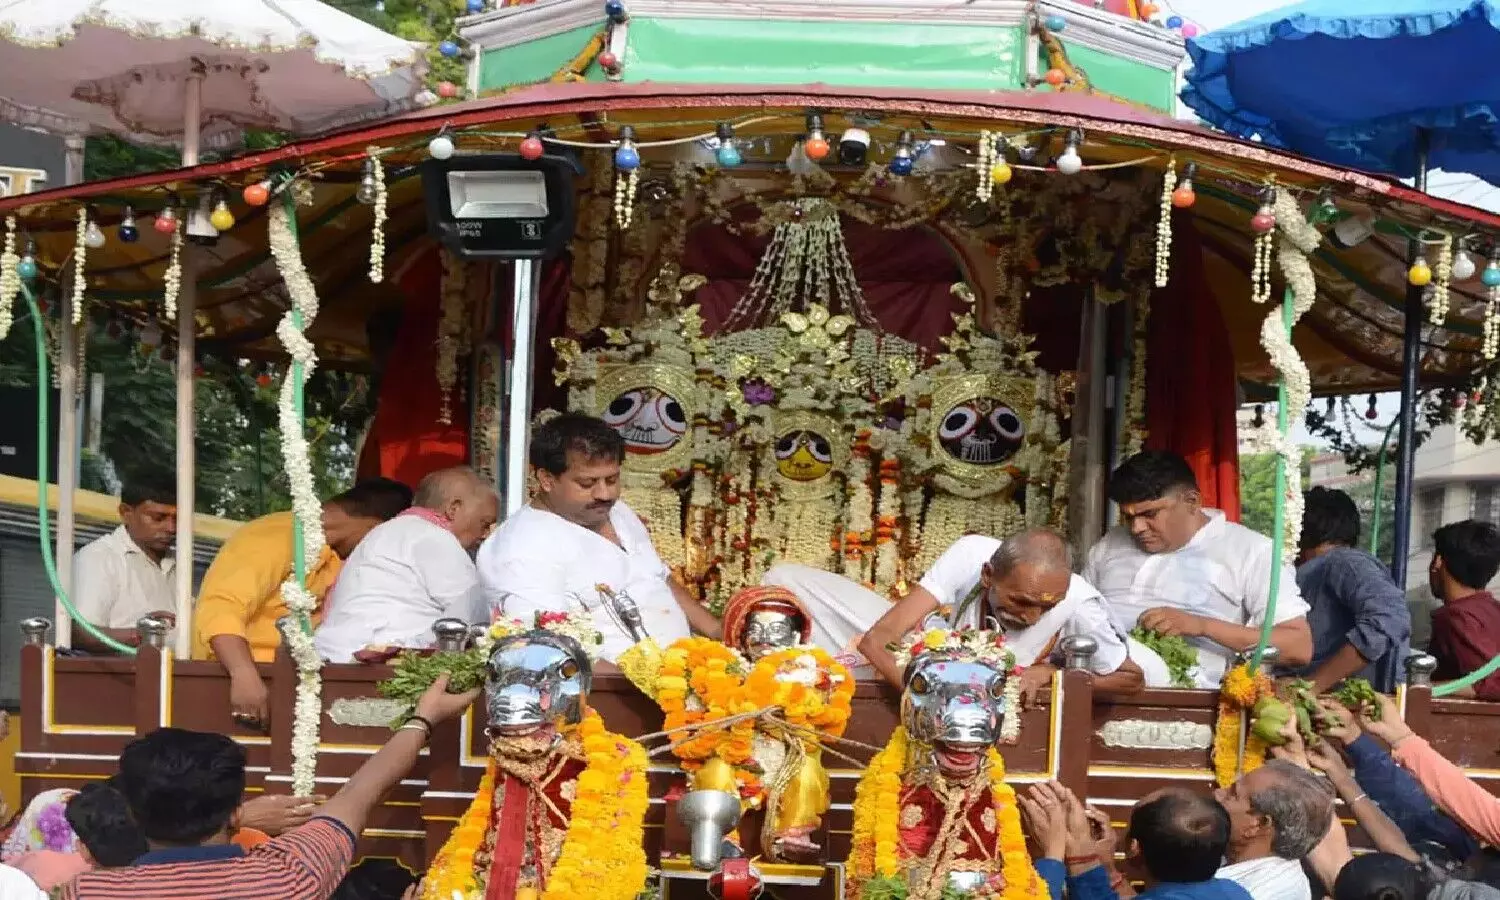 History of Rath Yatra in Varanasi is interesting, Nankhatai has a great attraction in the fair